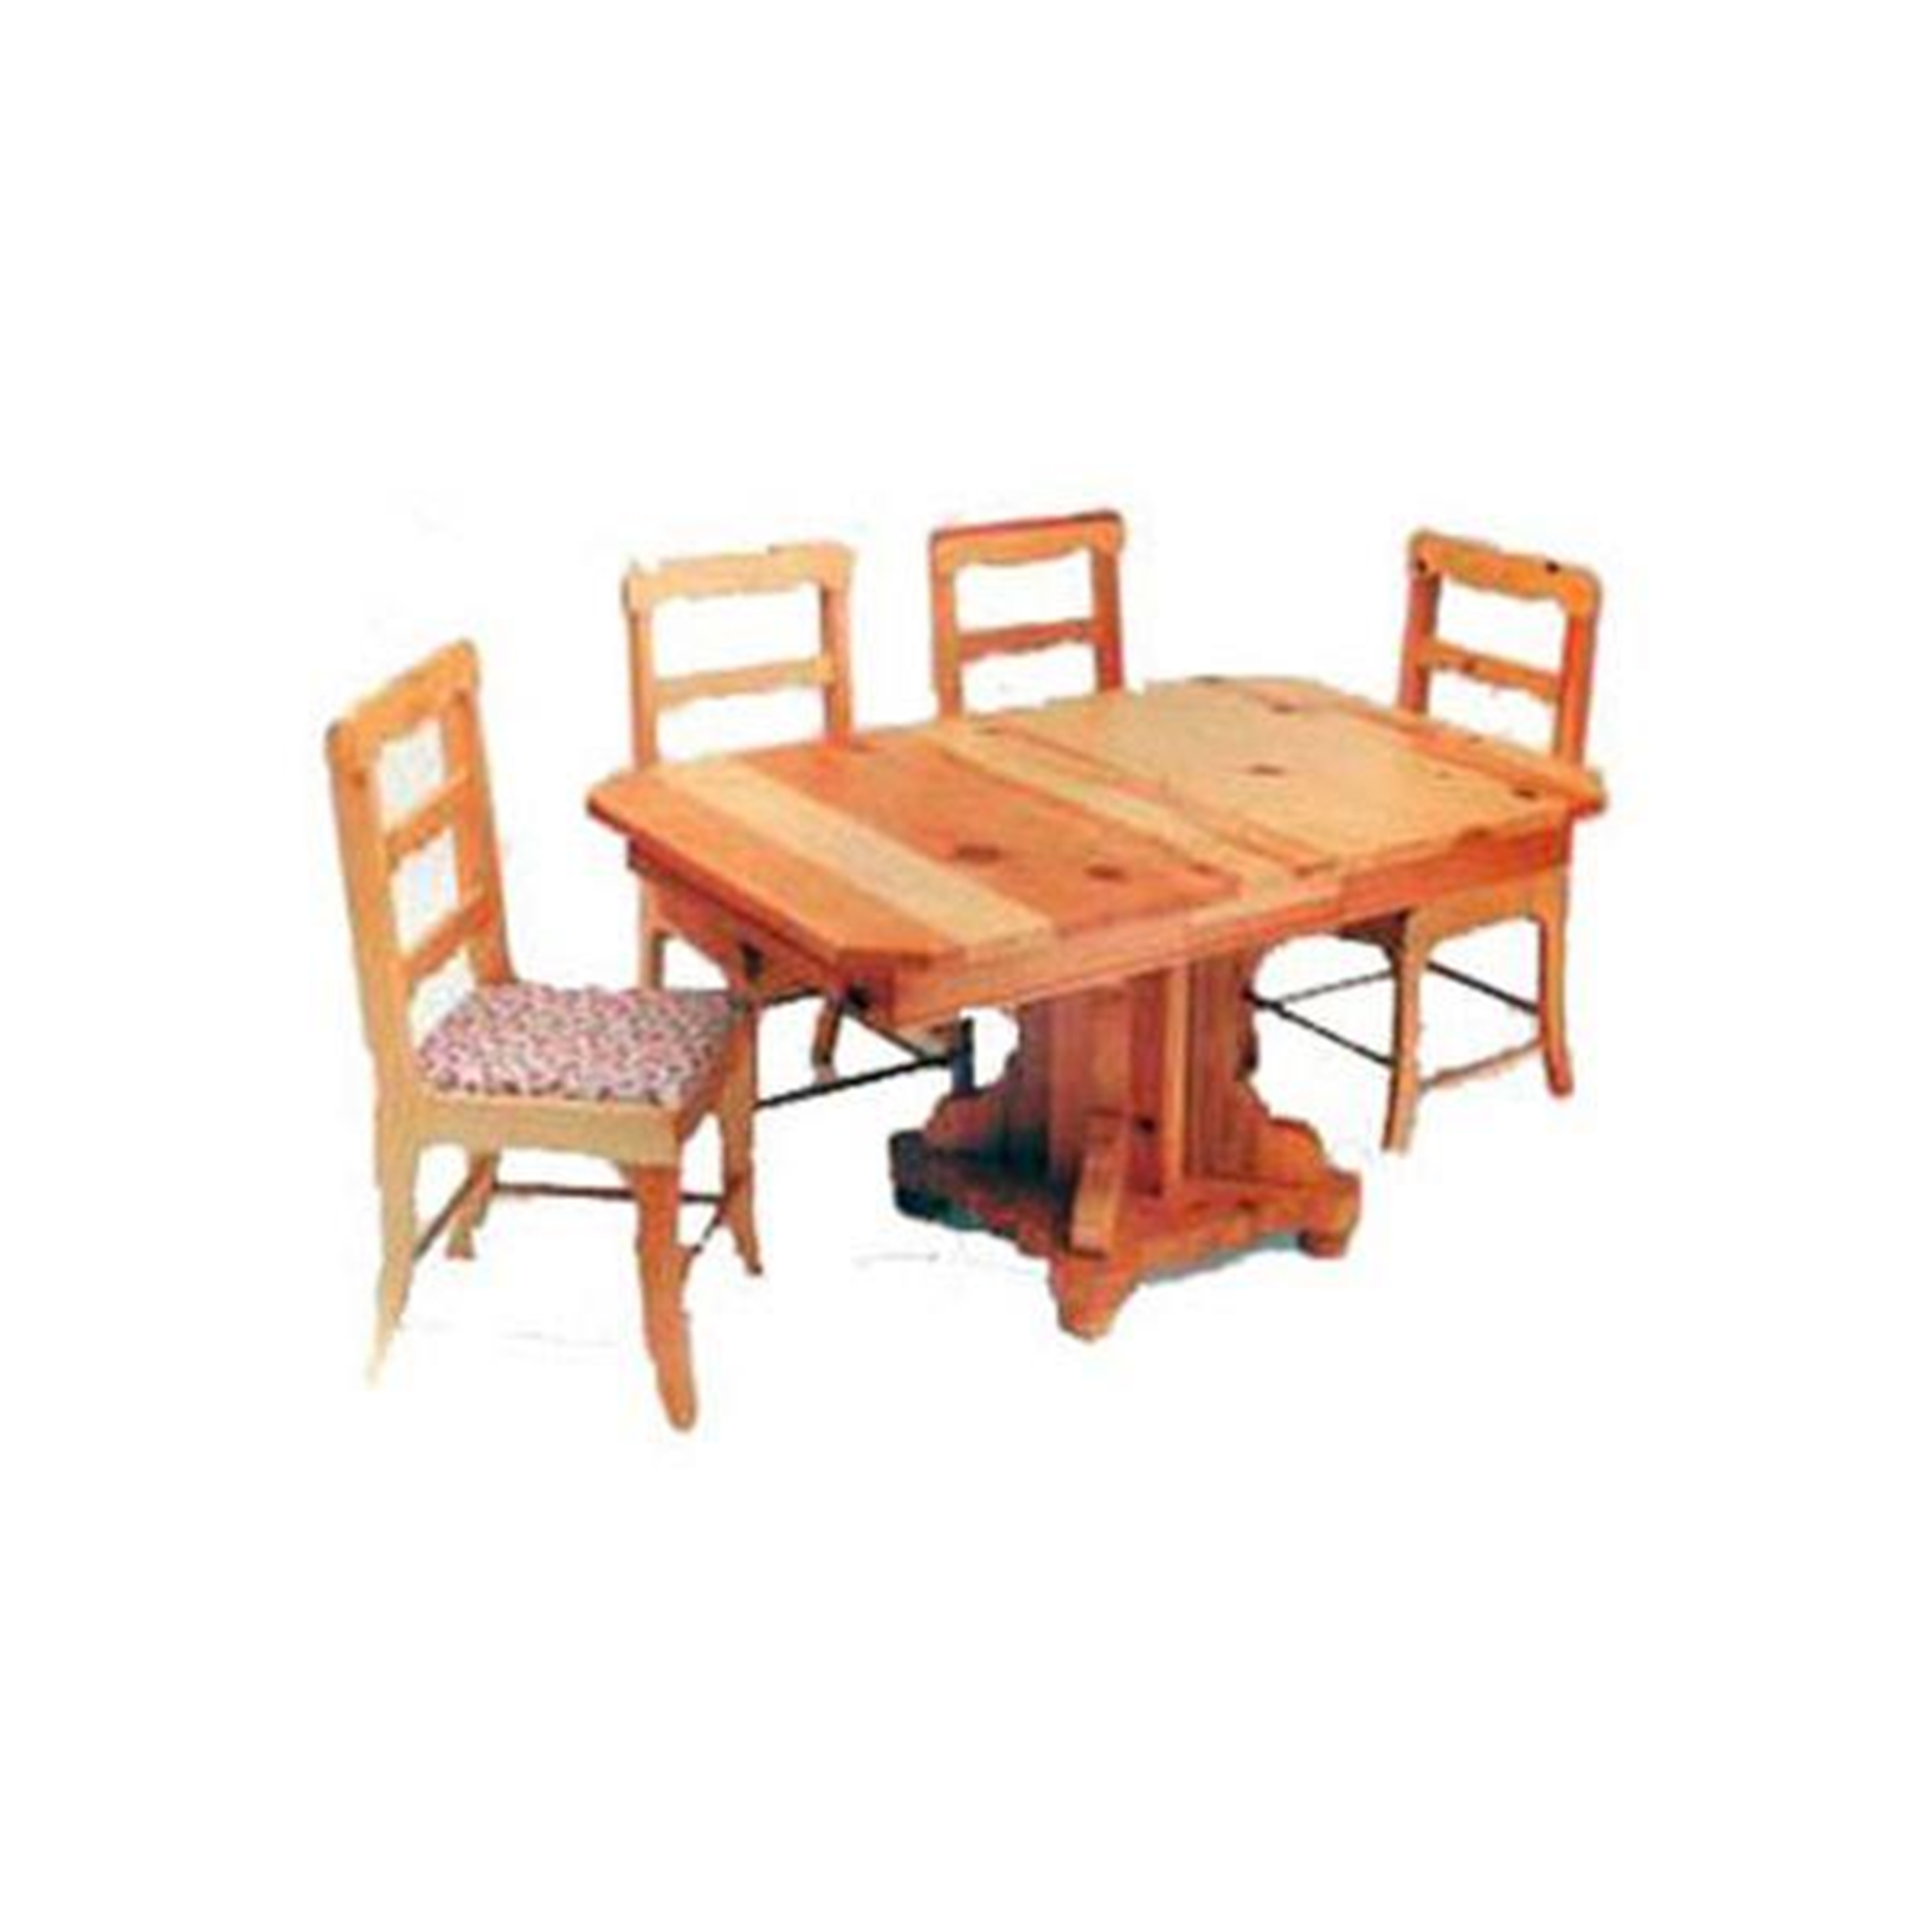 Woodworking Project Paper Plan To Build Kids' Extension Table With Chair